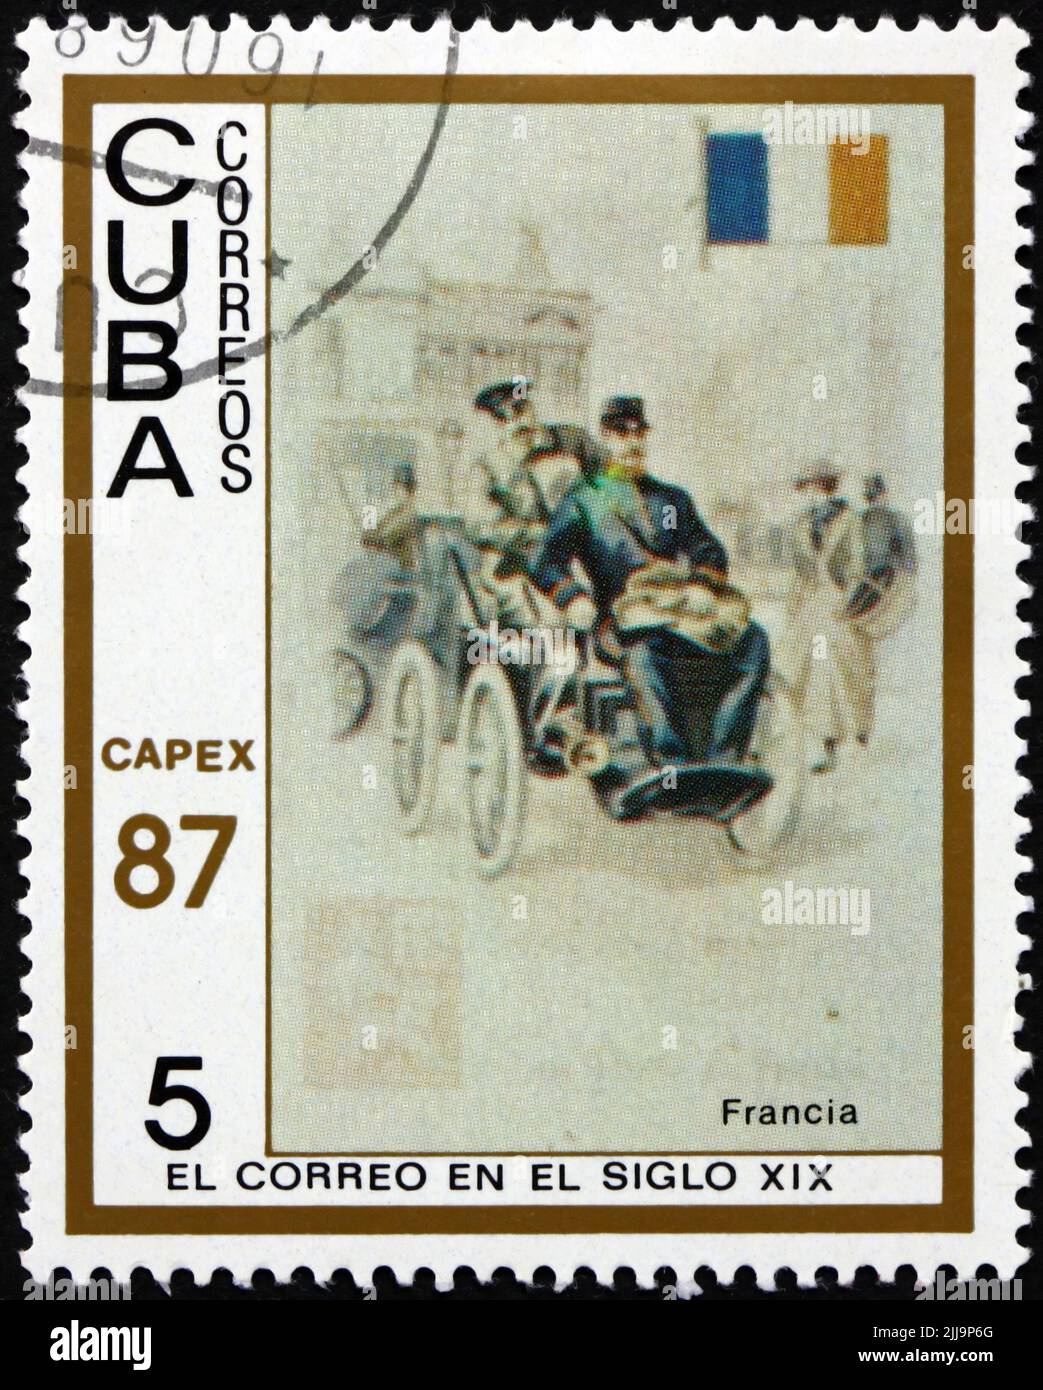 CUBA - CIRCA 1987: a stamp printed in Cuba shows early p.o. automobile from France, pictured on cigarette cards, circa 1987 Stock Photo